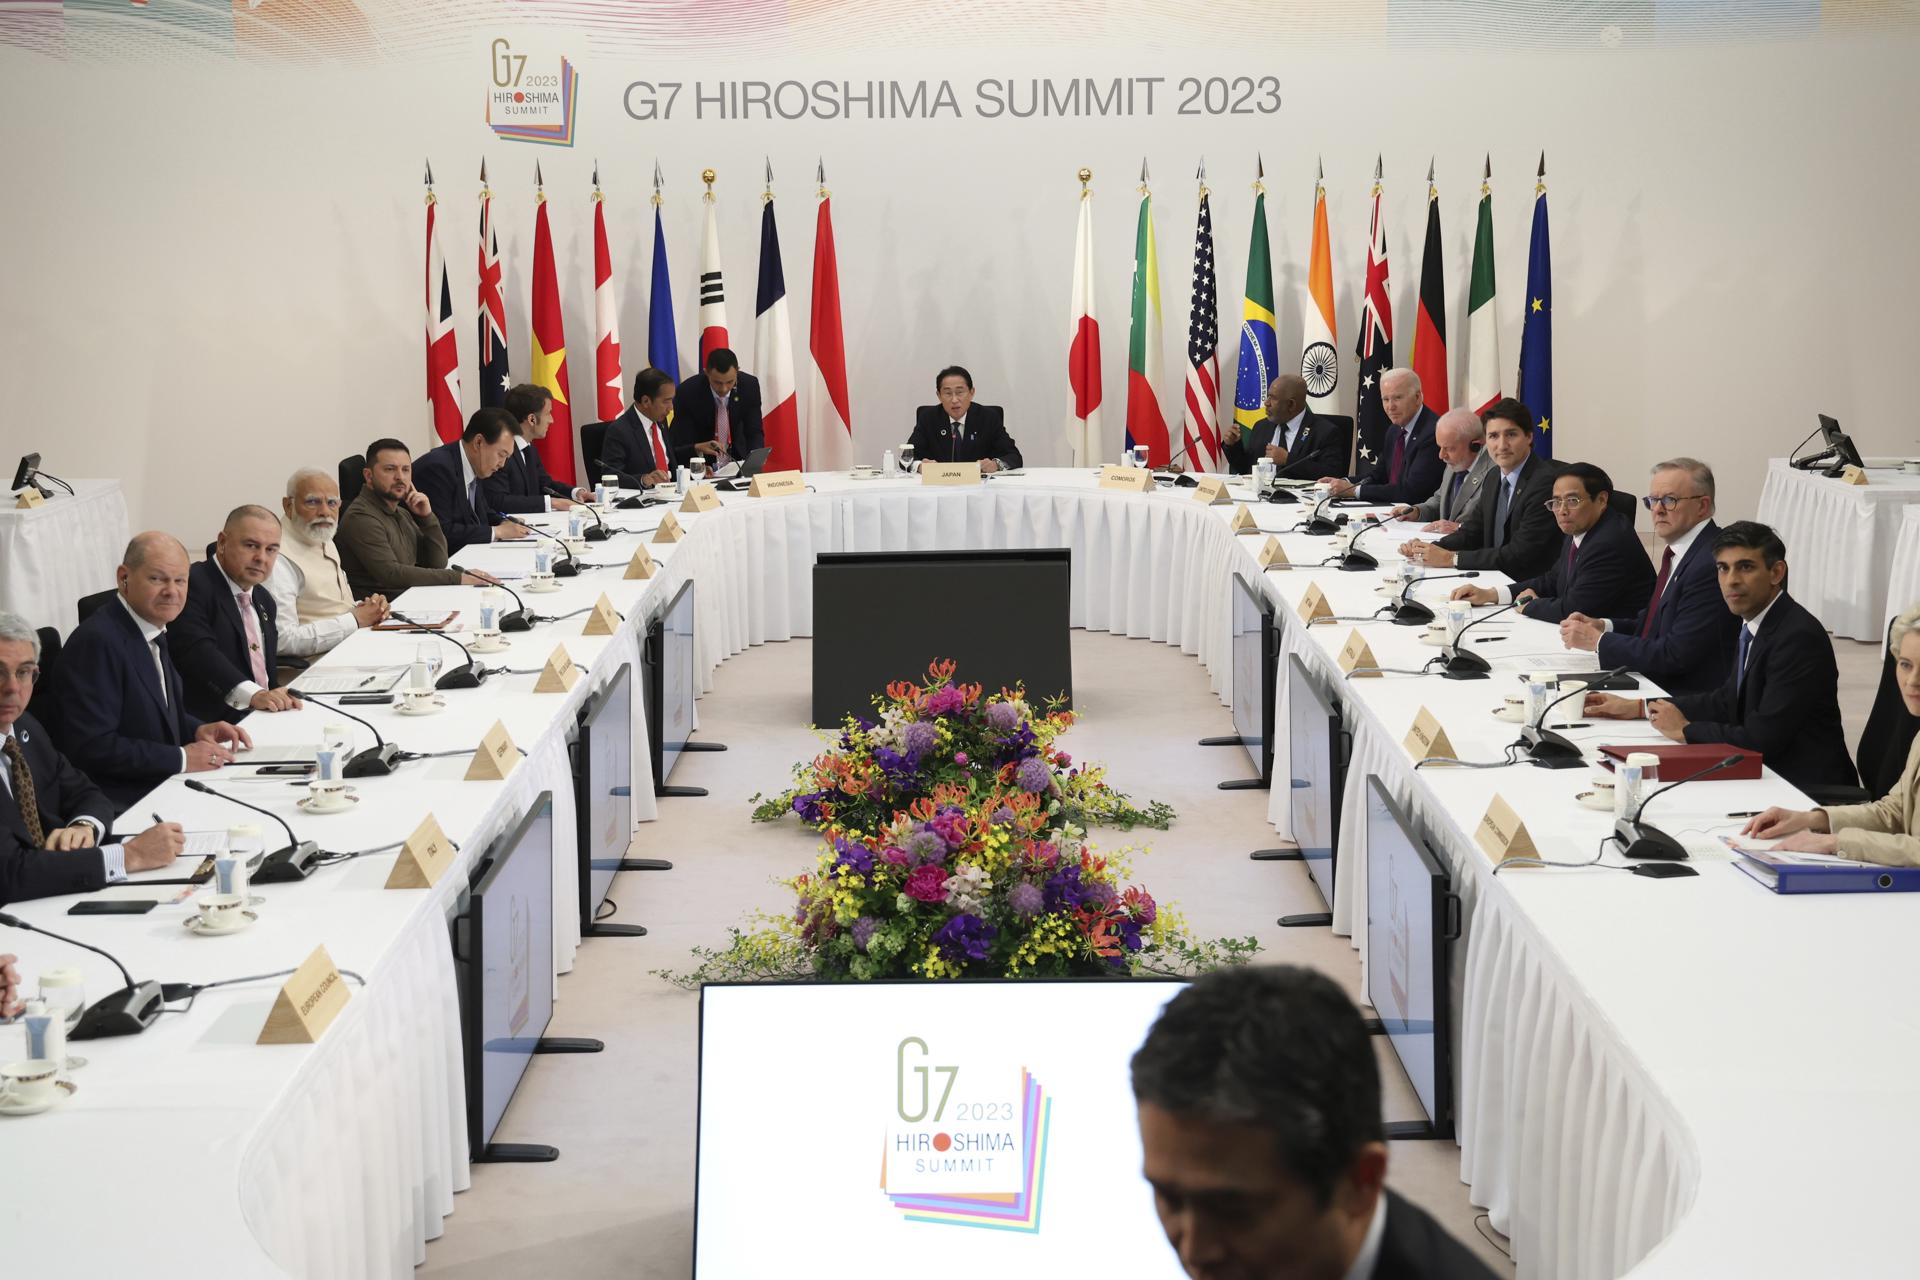 Leaders of the Group of Seven nations attend a session with other guest countries during the G7 Hiroshima Summit in Hiroshima, Japan, 21 May 2023. EFE-EPA/JAPAN POOL JAPAN OUT EDITORIAL USE ONLY/
